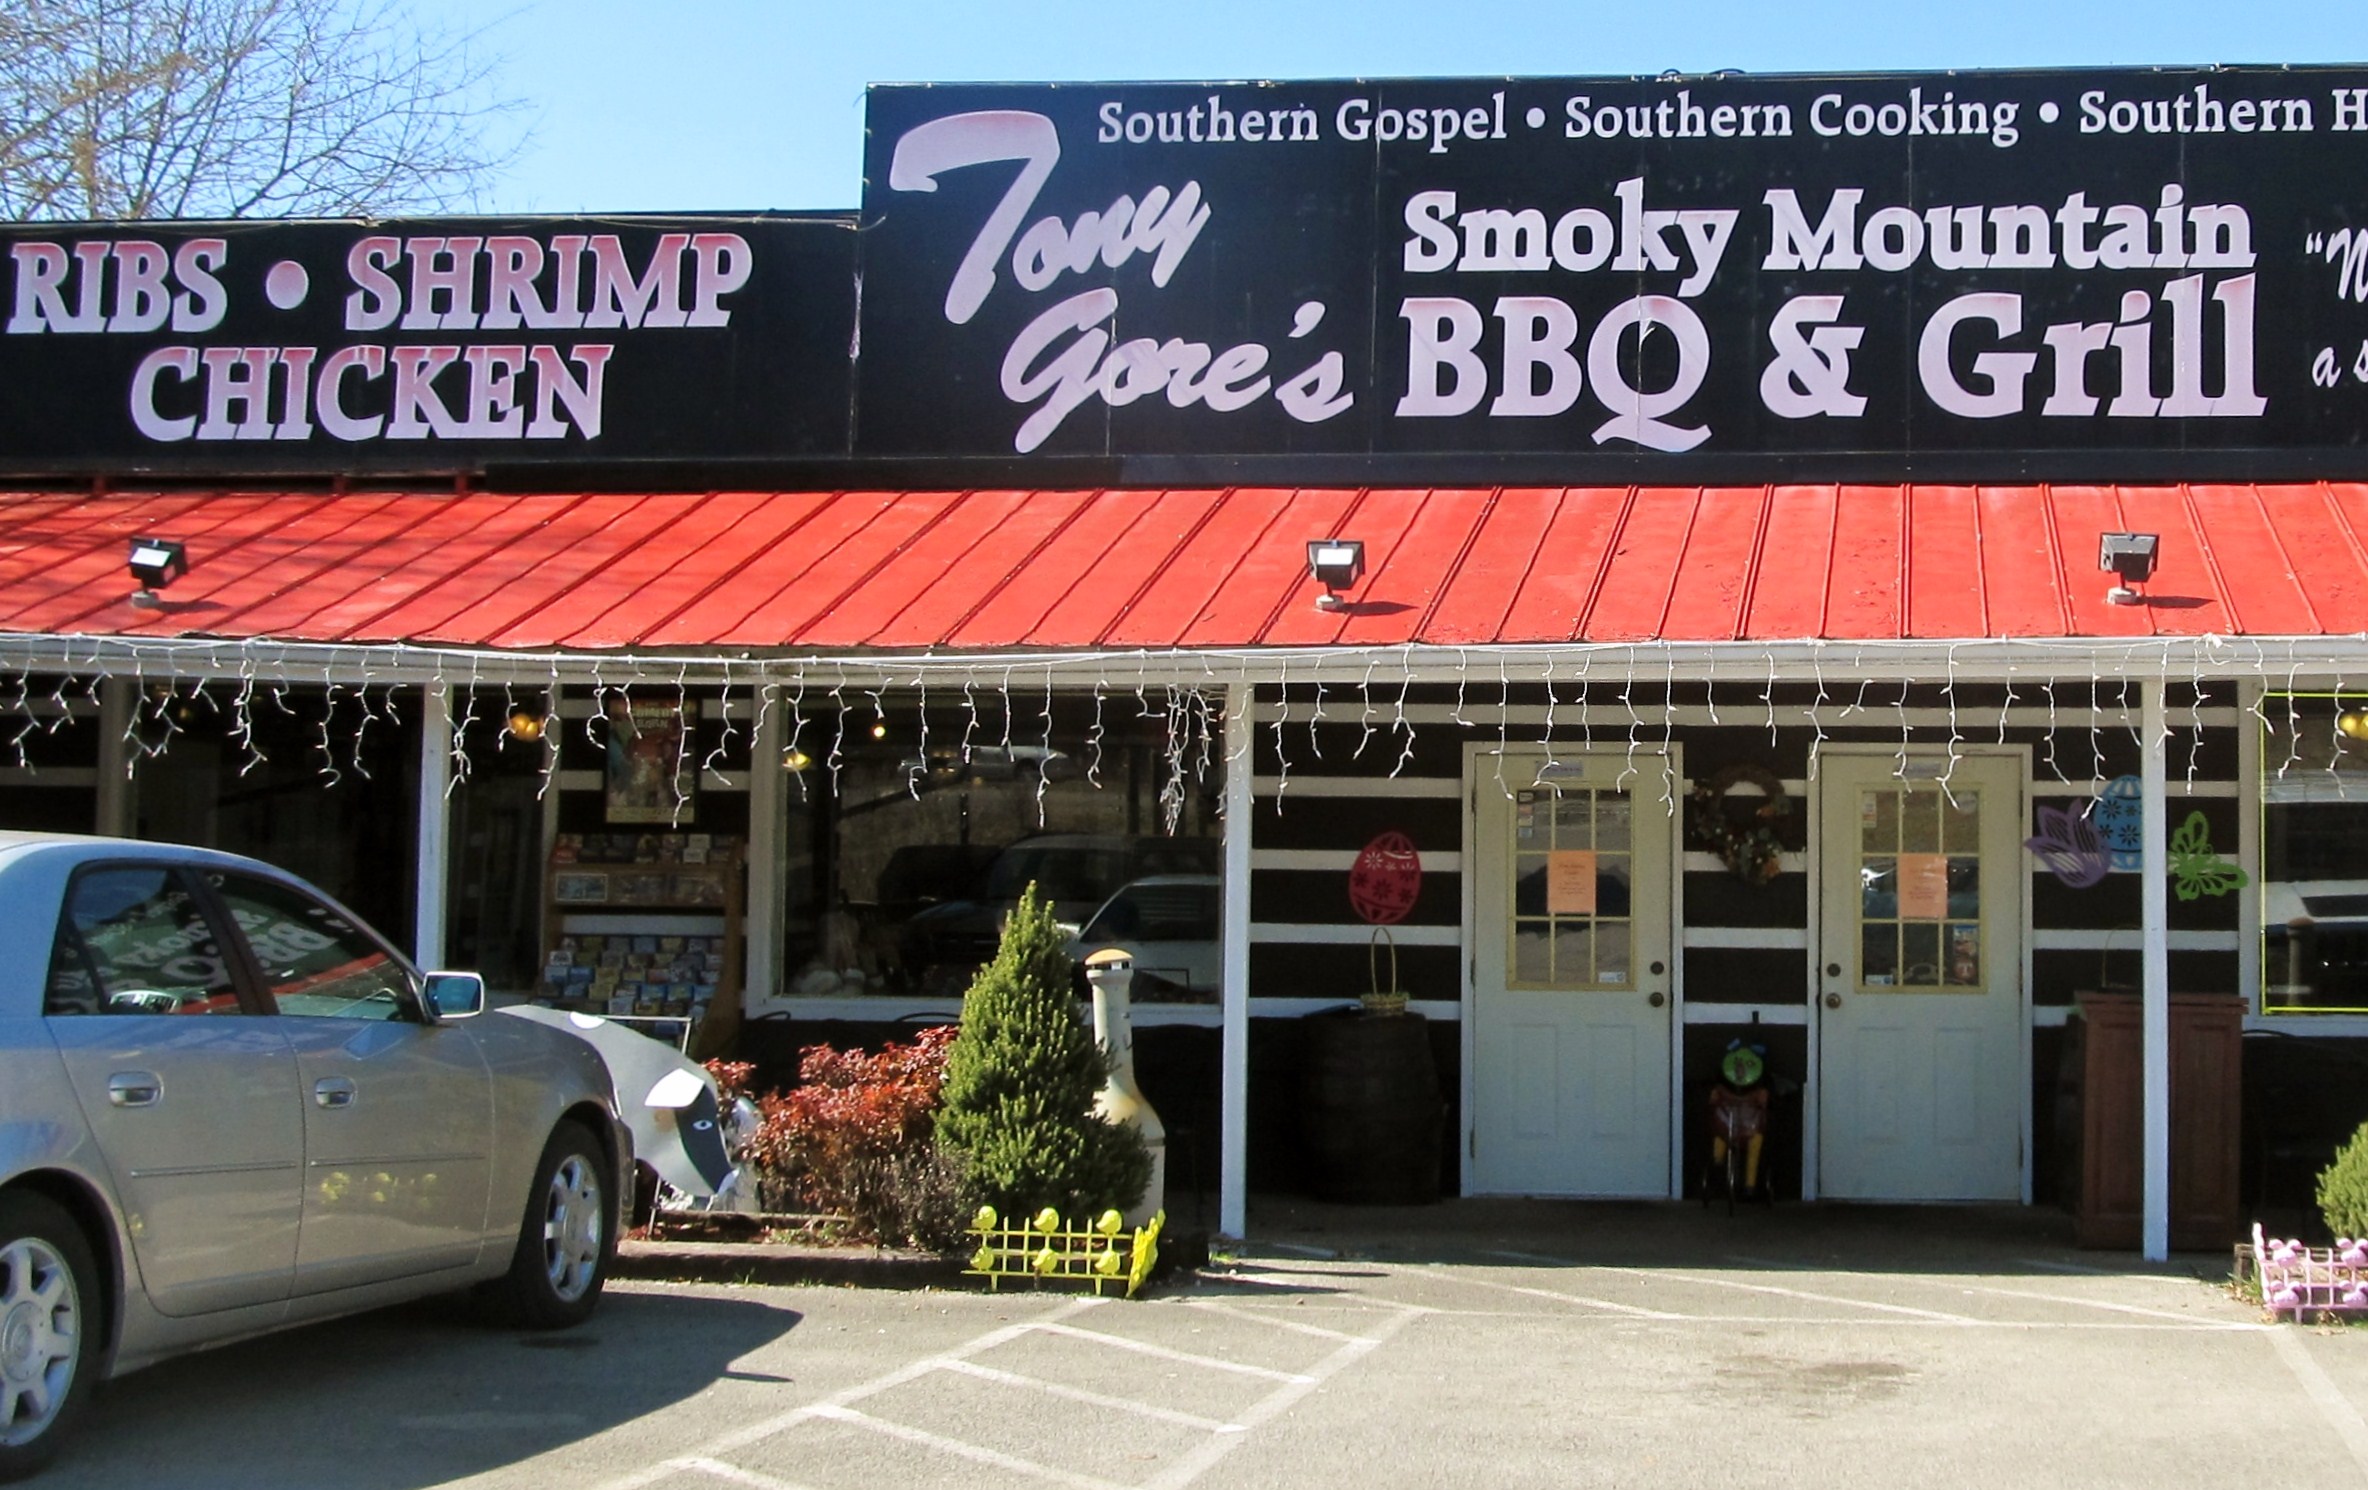 You'll love food inside Sevierville Restaurants Tony Gore's BBQ any time of the year, plus live gospel music!